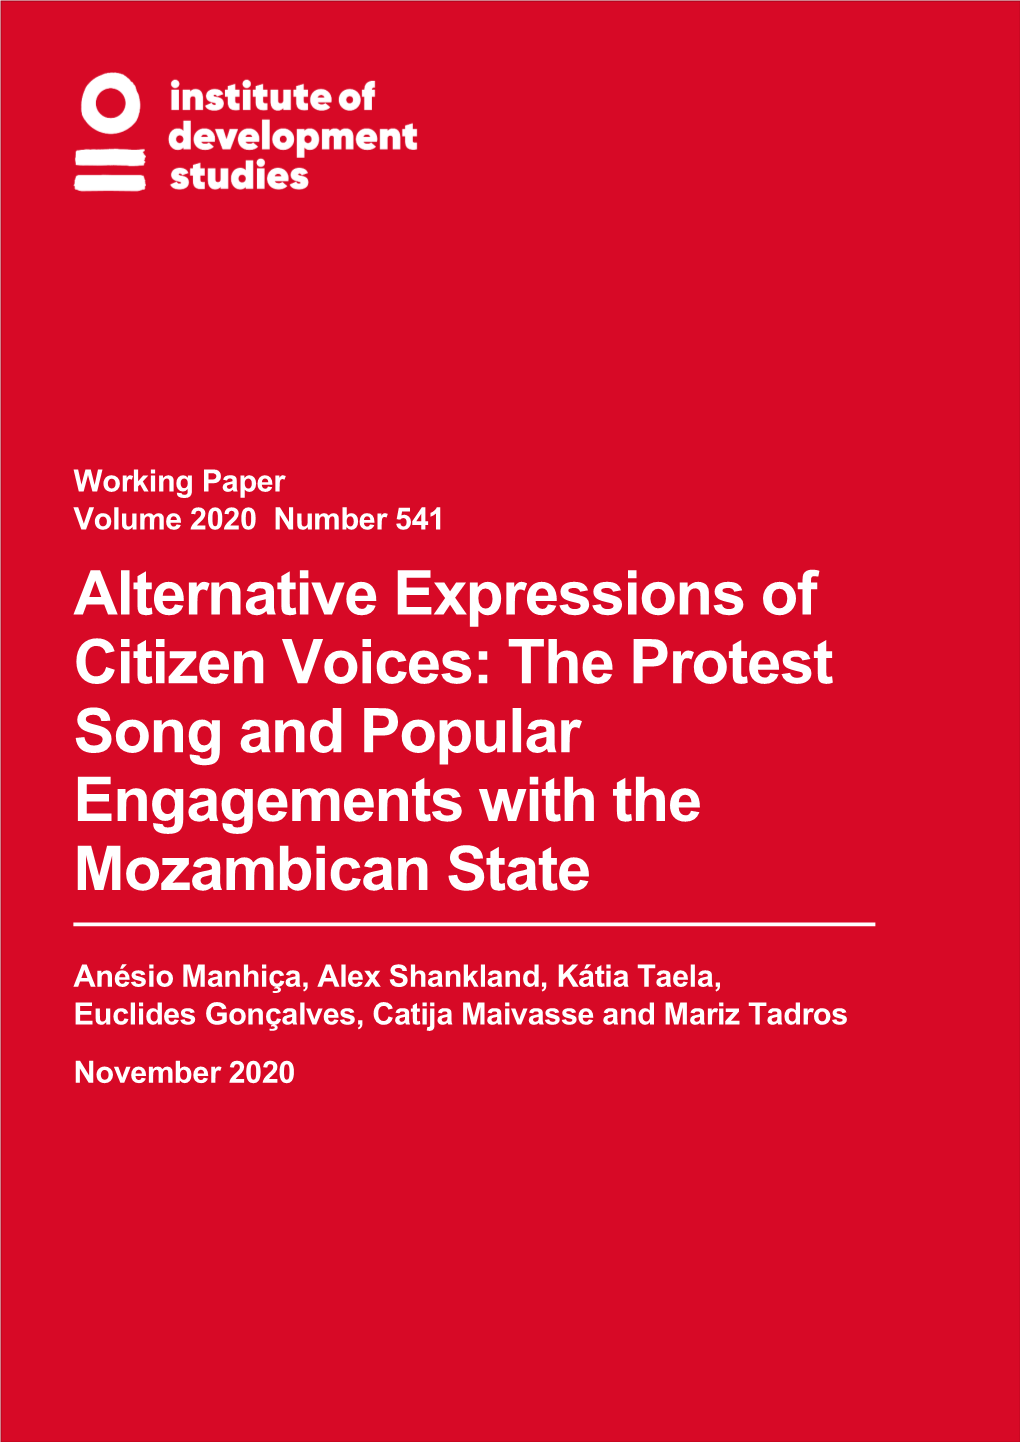 Alternative Expressions of Citizen Voices: the Protest Song and Popular Engagements with the Mozambican State